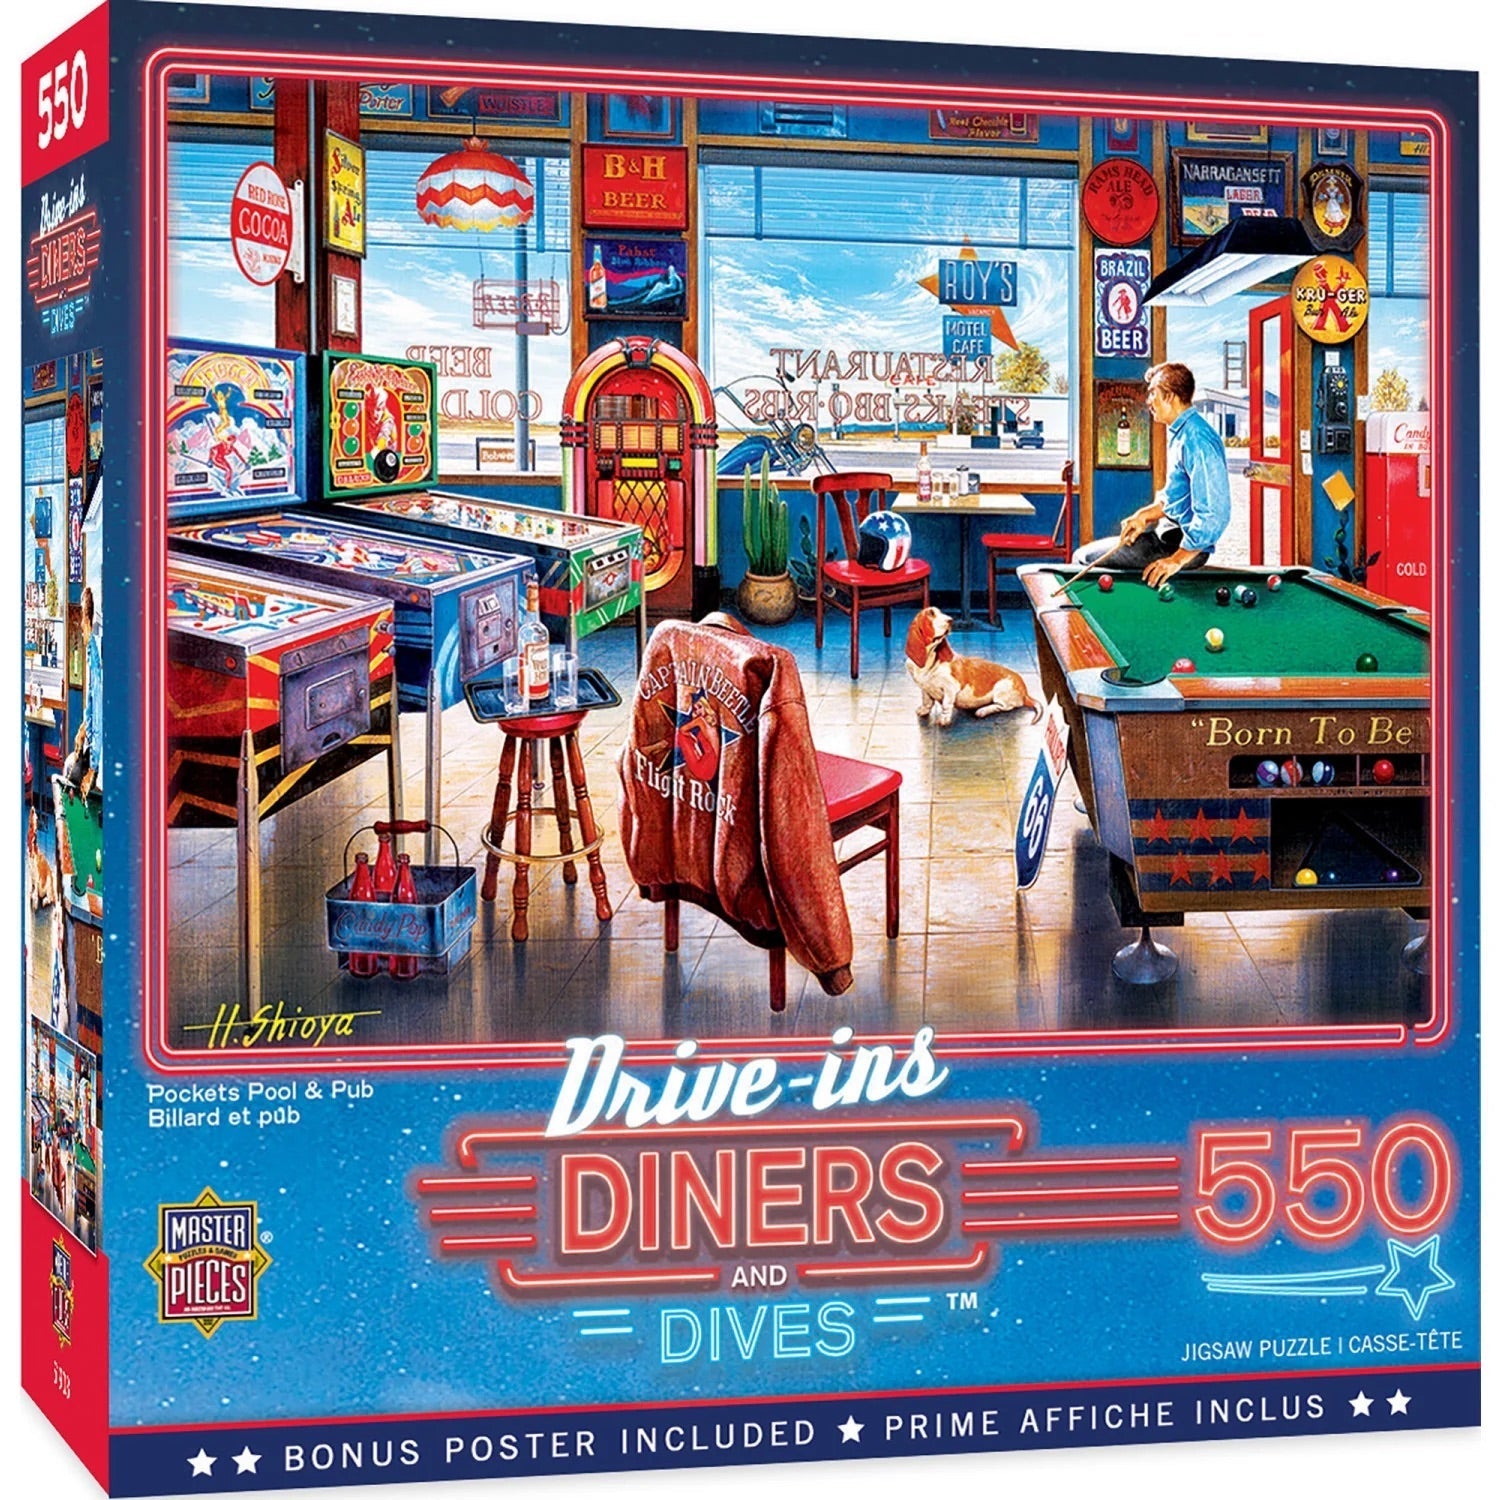  Drive Ins - Diners and Dives 550 Pcs Jigsaw Puzzle